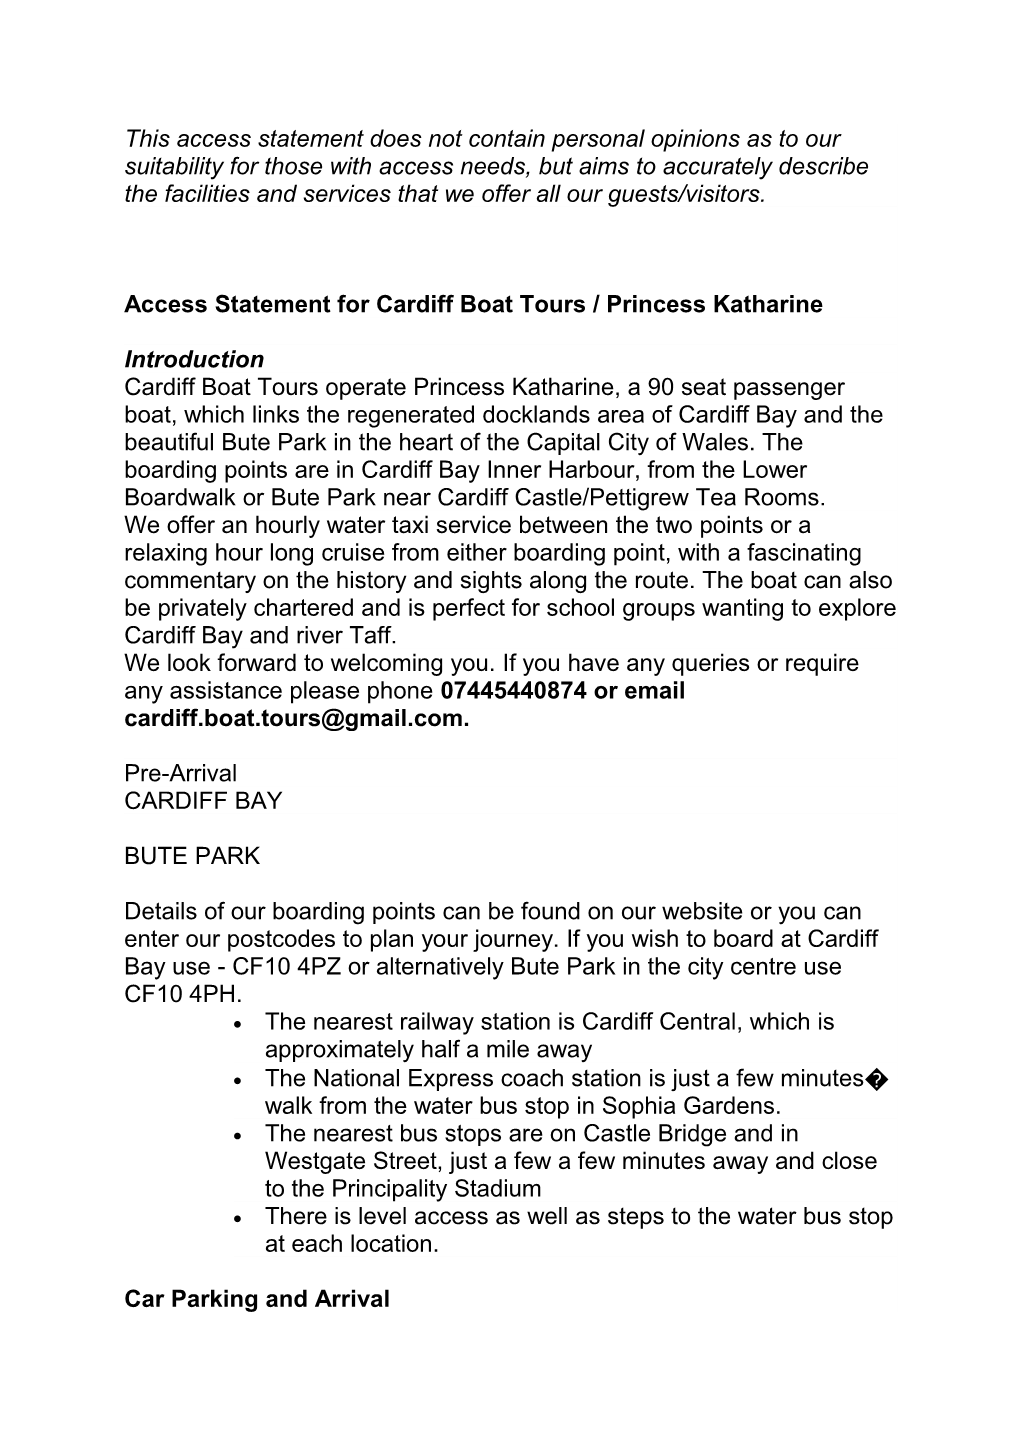 Access Statement for Cardiff Boat Tours / Princess Katharine